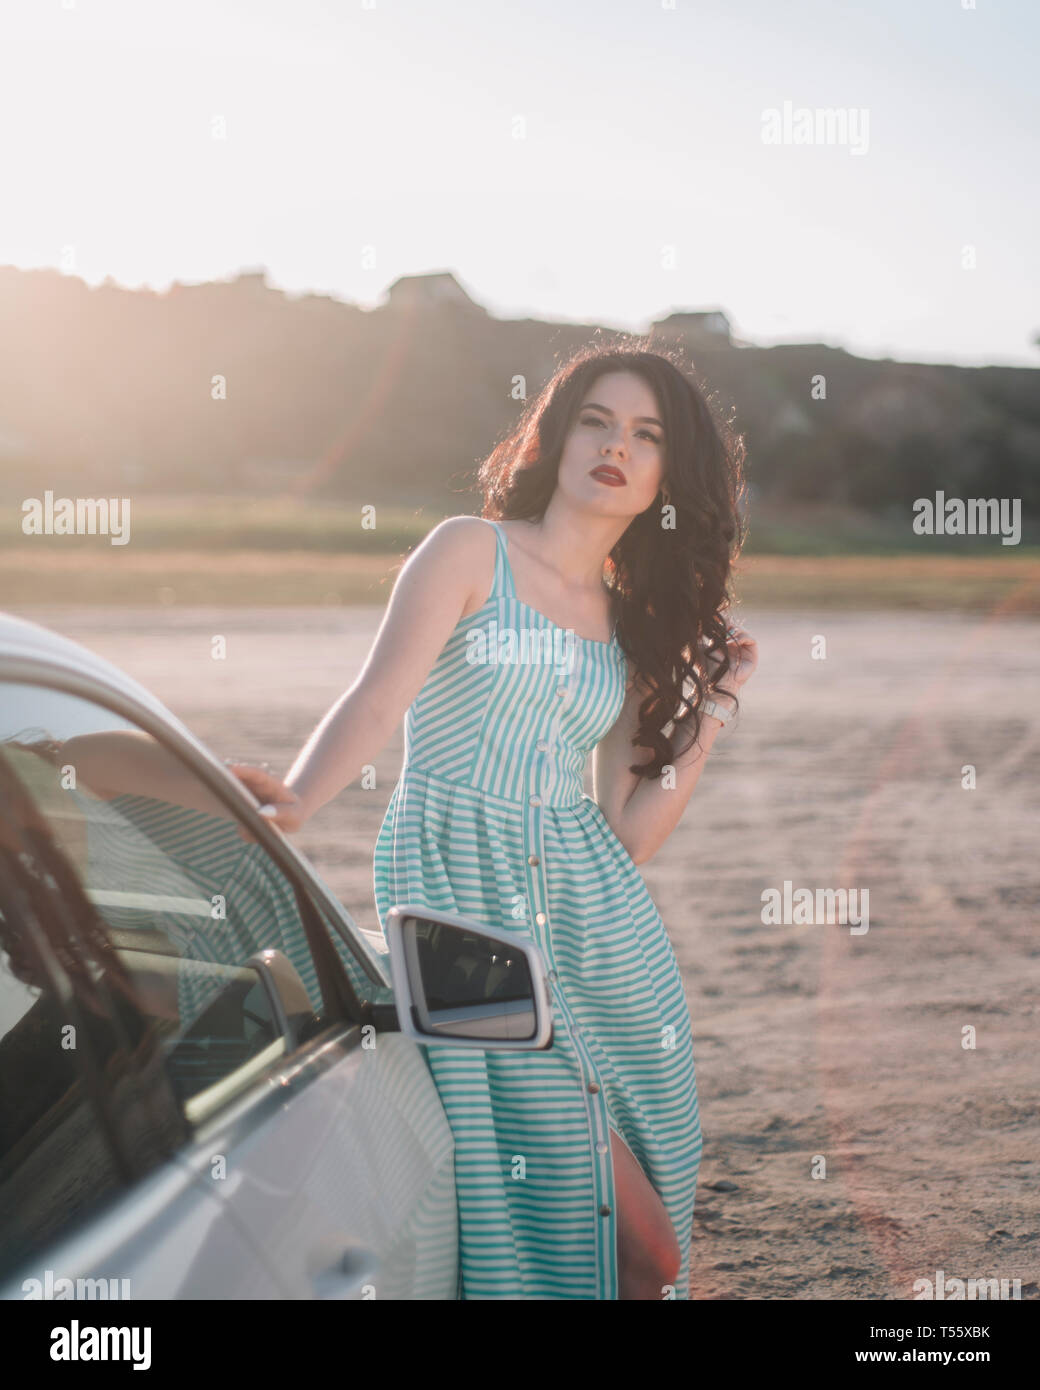 Young woman wearing striped dress by car Stock Photo